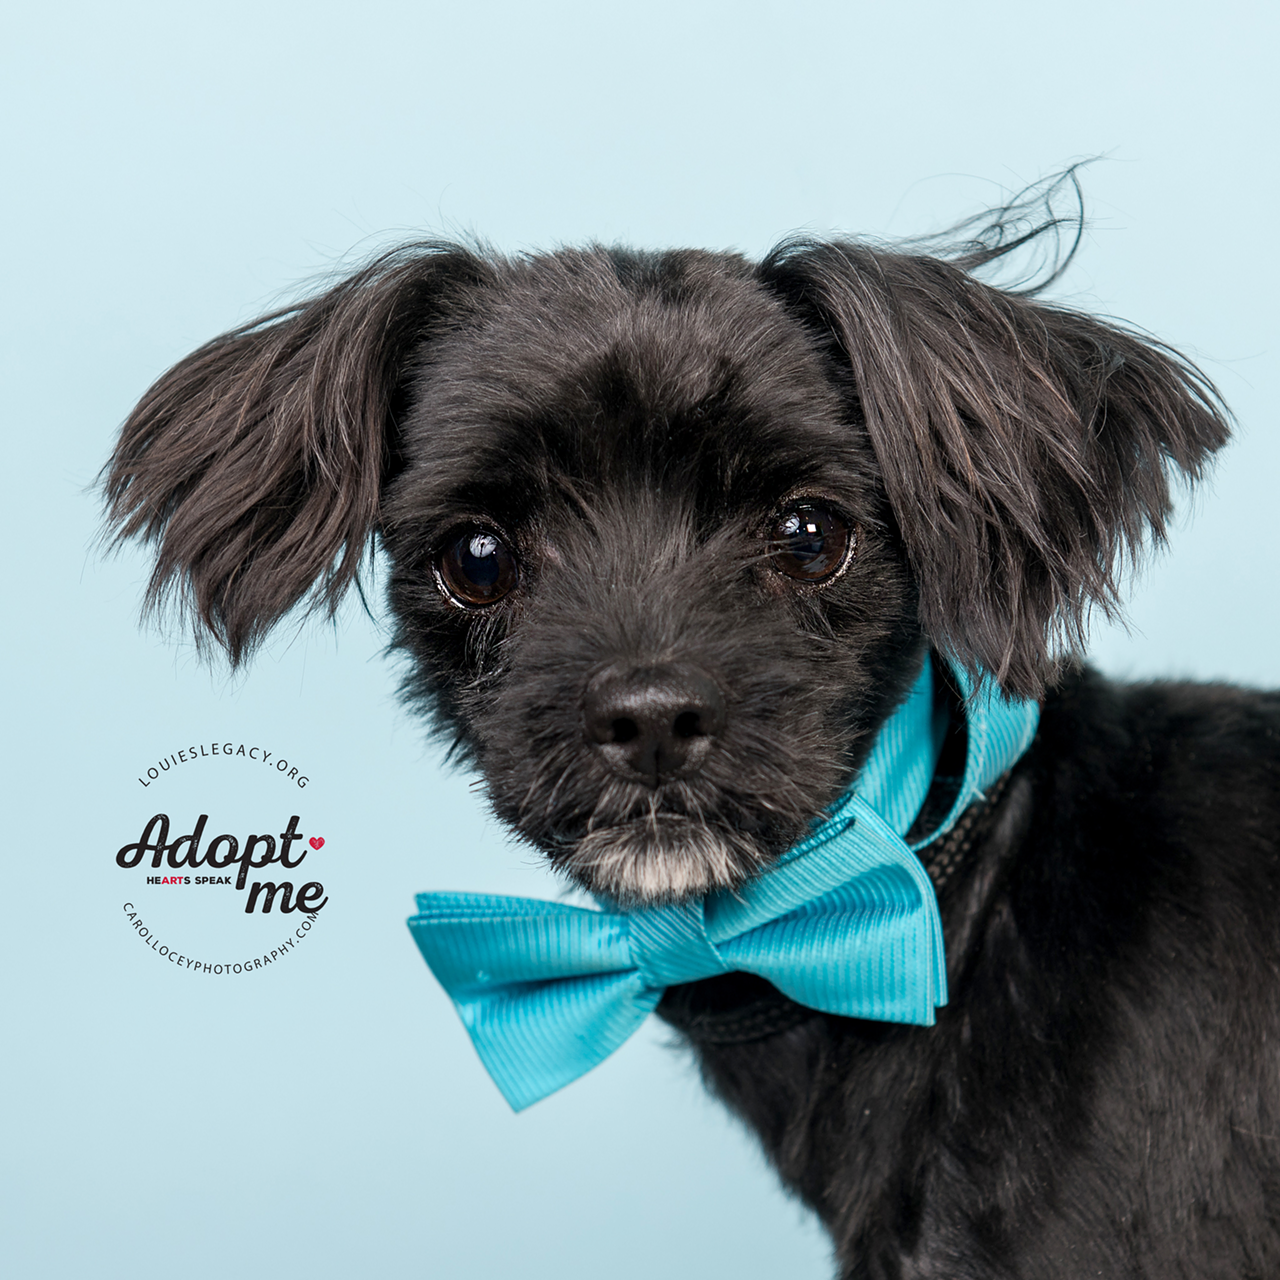 Name: Bentley | Breed: Shih Tzu mix | Age: 1 year old | Sex: Male | Rescue: Louie's Legacy